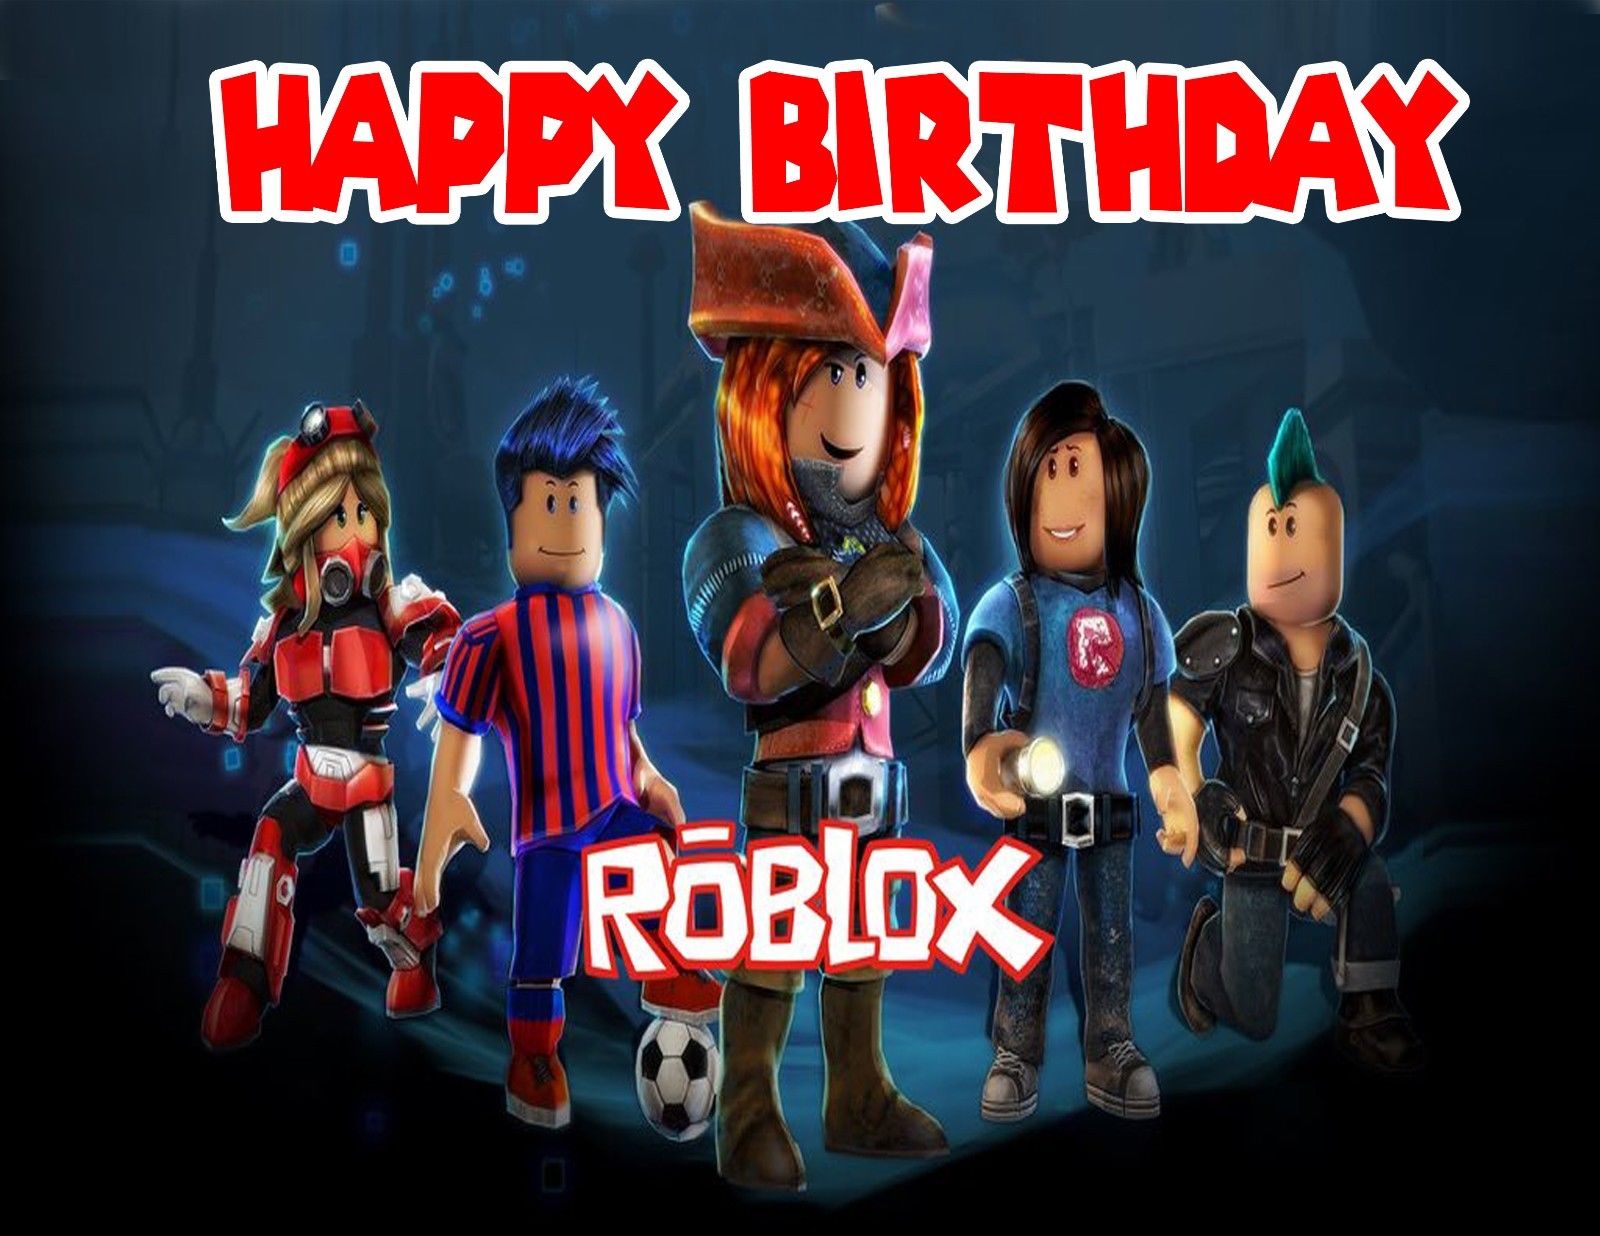 Roblox Personalized Edible Print Premium Cake Topper Frosting Sheets 5 Edible Toppers More - happy birthday roblox cake topper printable